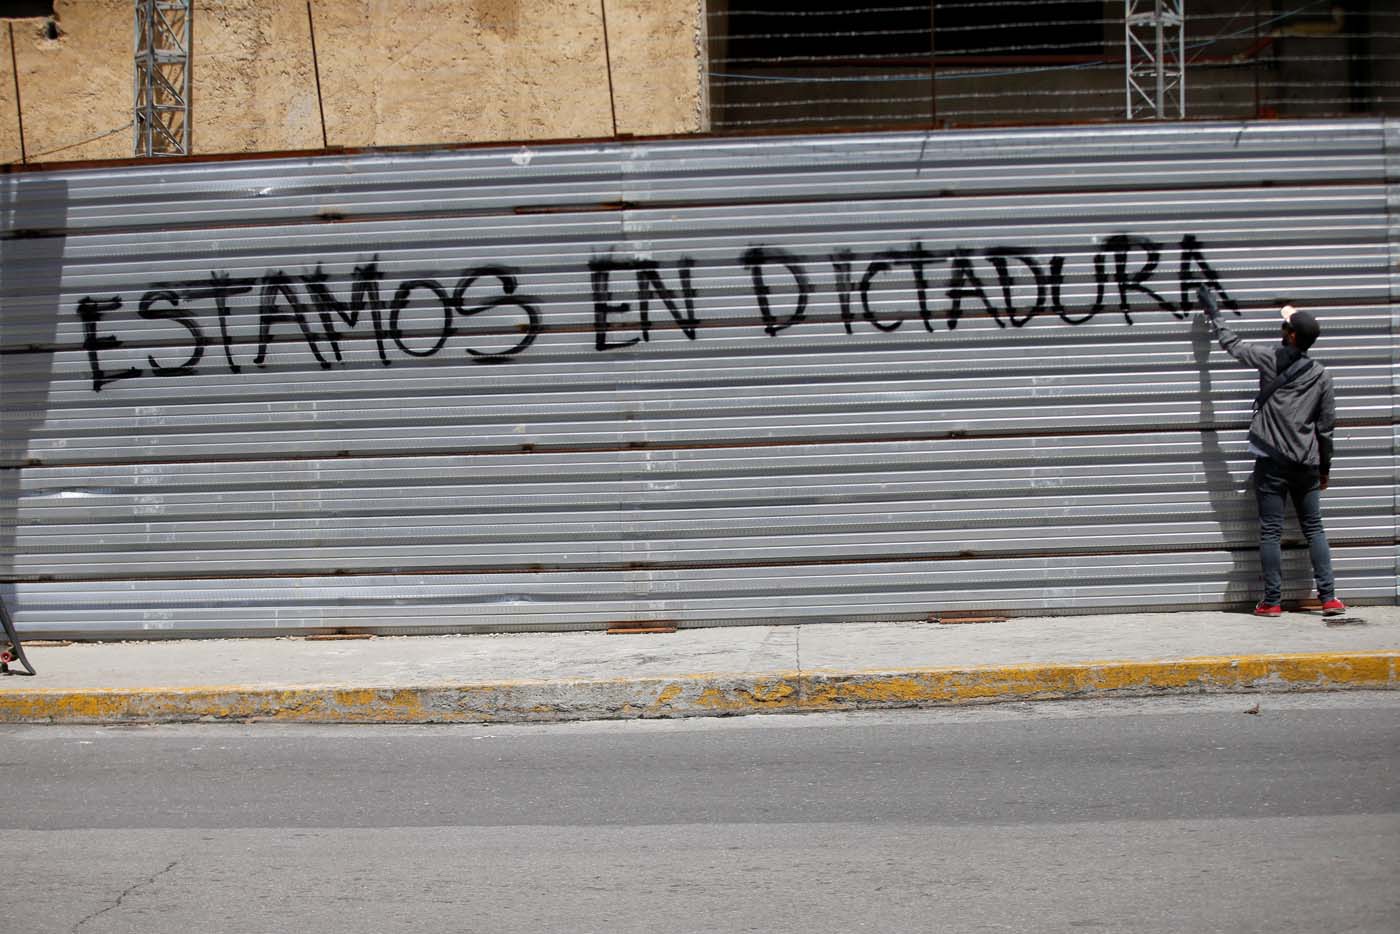 A demonstrator paints a graffiti that reads "we are in a dictatorship" during a strike called to protest against Venezuelan President Nicolas Maduro's government in Caracas, Venezuela, July 20, 2017. REUTERS/Andres Martinez Casares